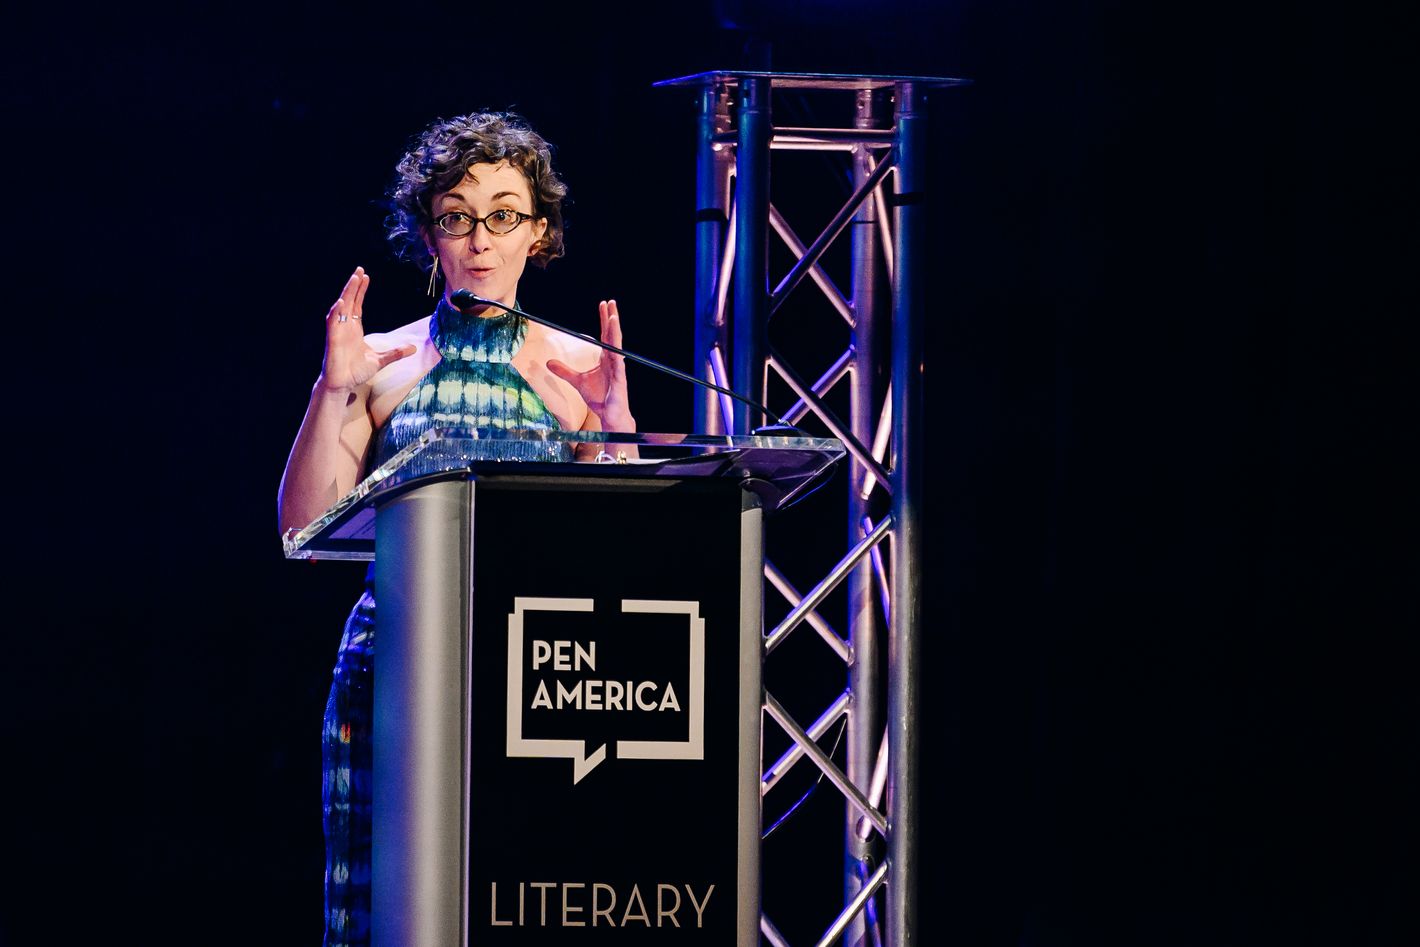 The PEN America Literary Awards Are Canceled. The Writers Know Why.